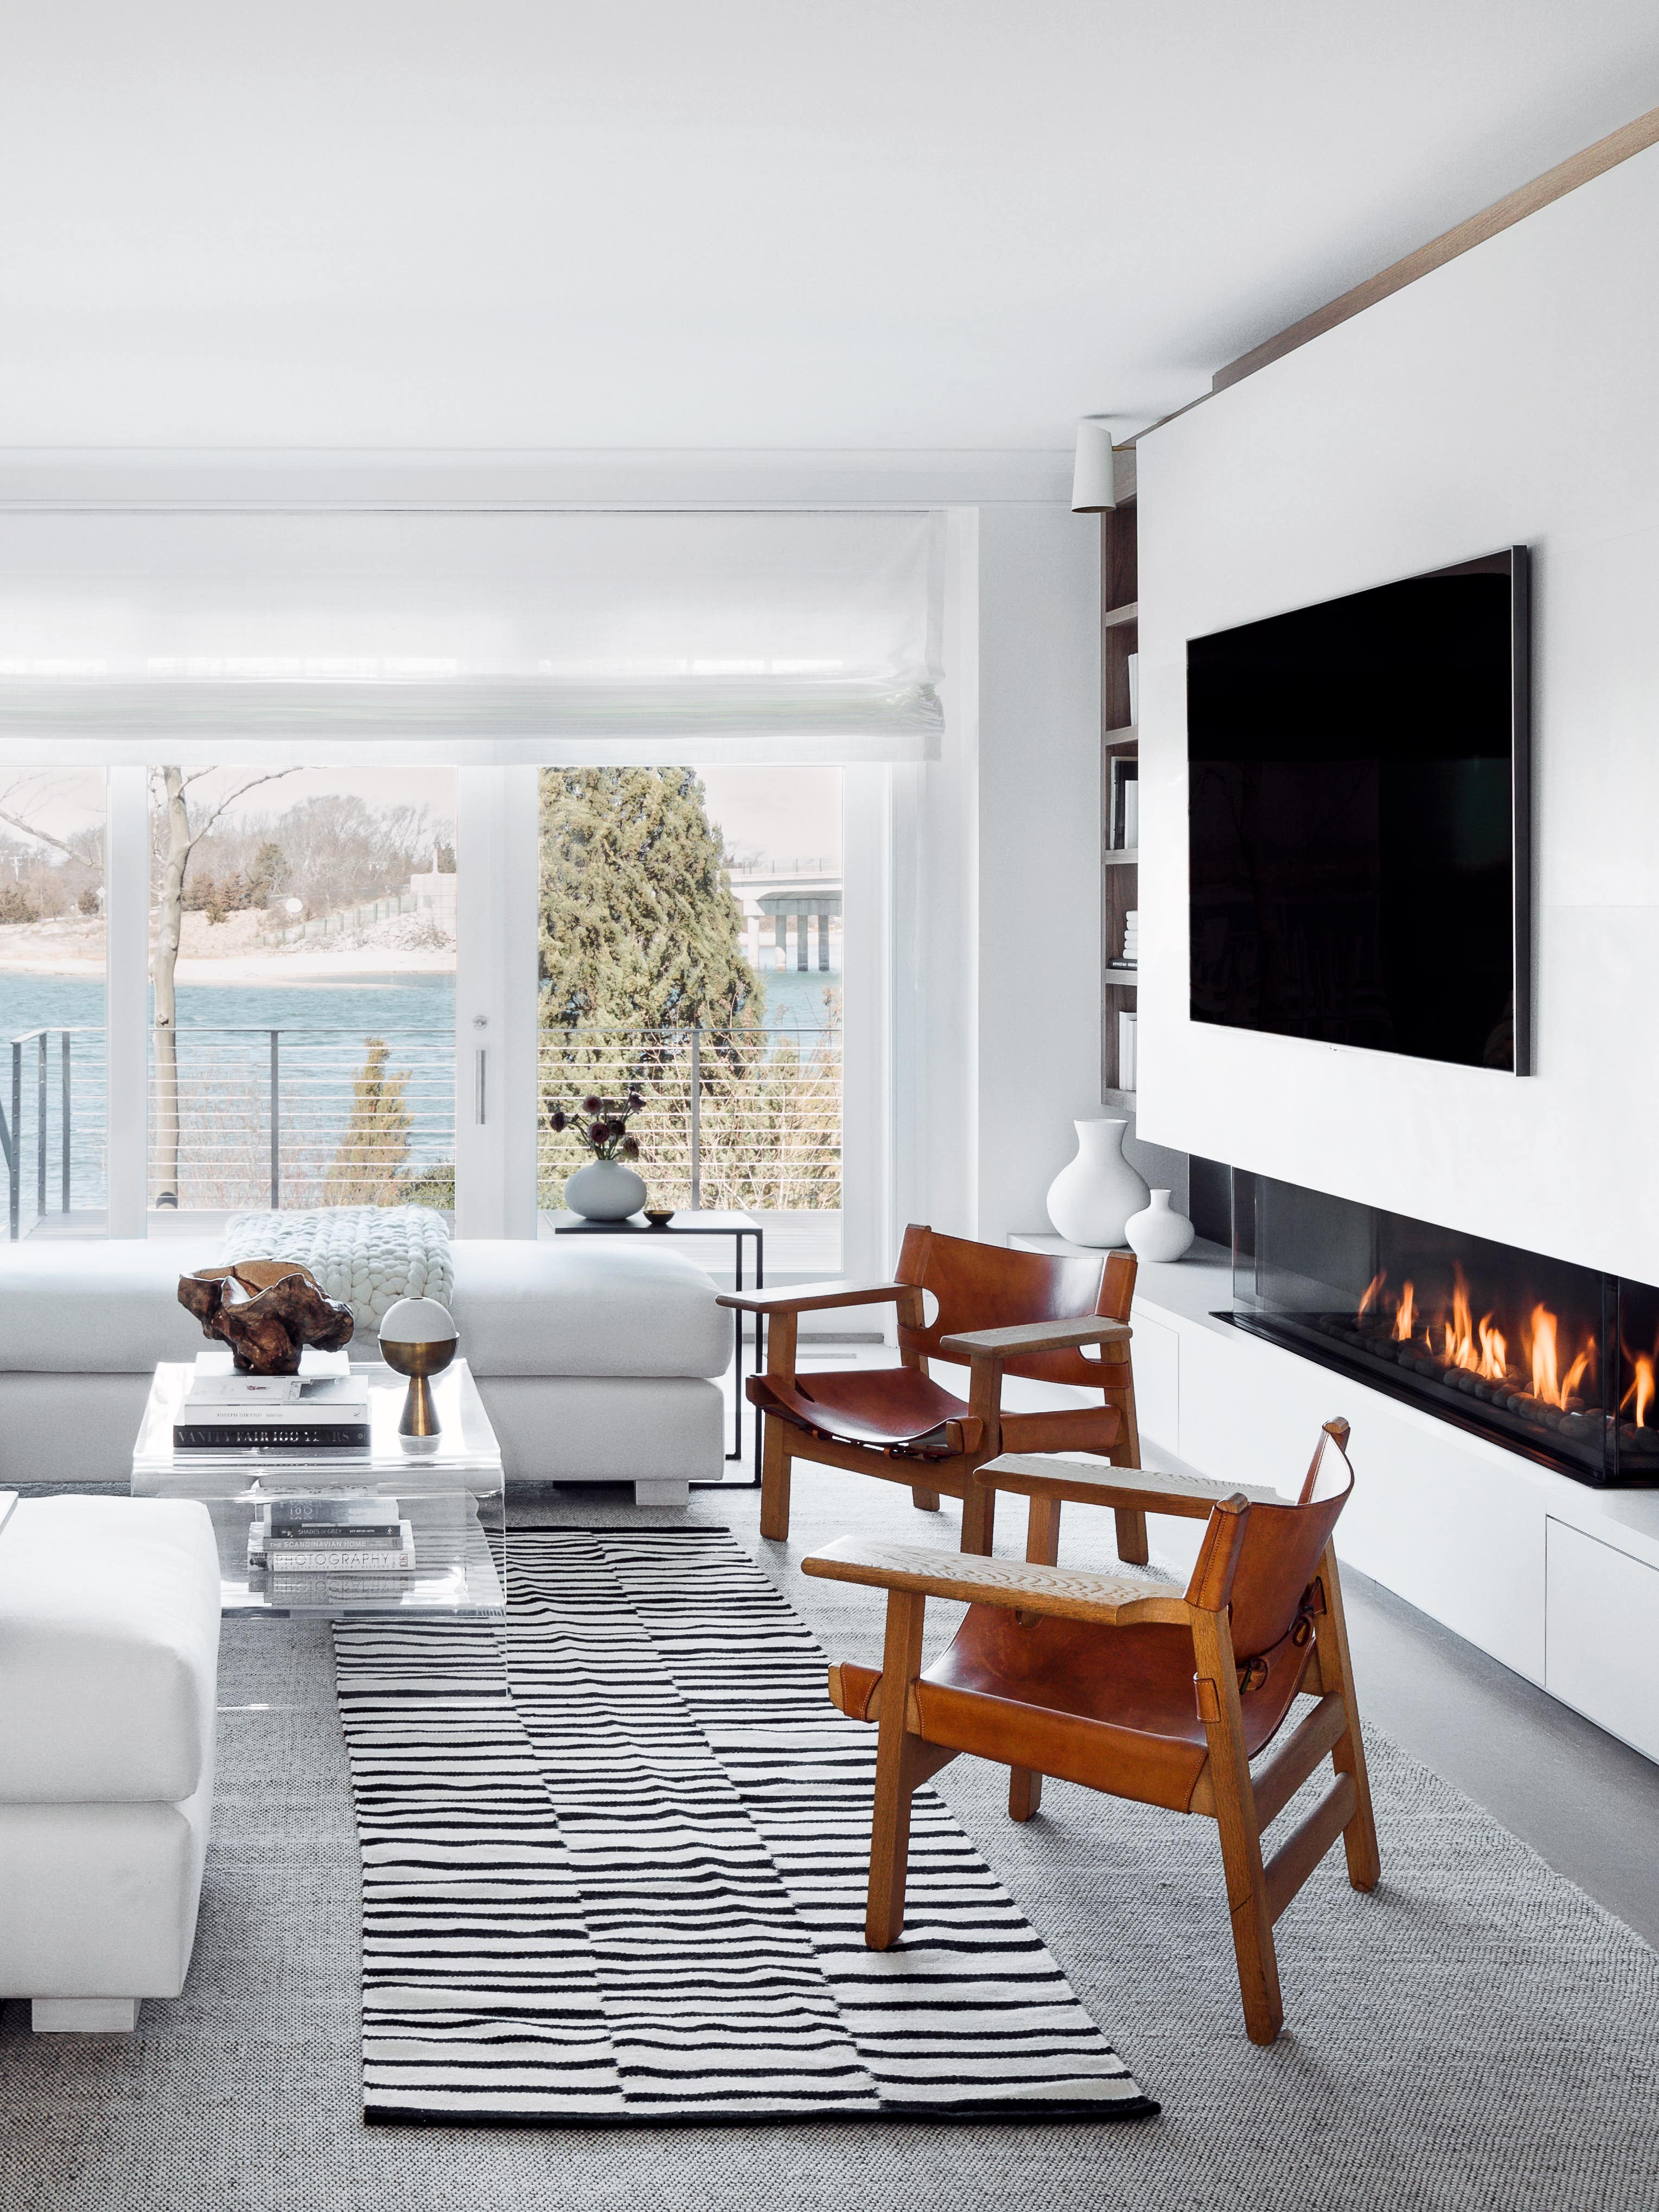 Beachy Minimalism Takes Center Stage in This Breezy Sag Harbor Home